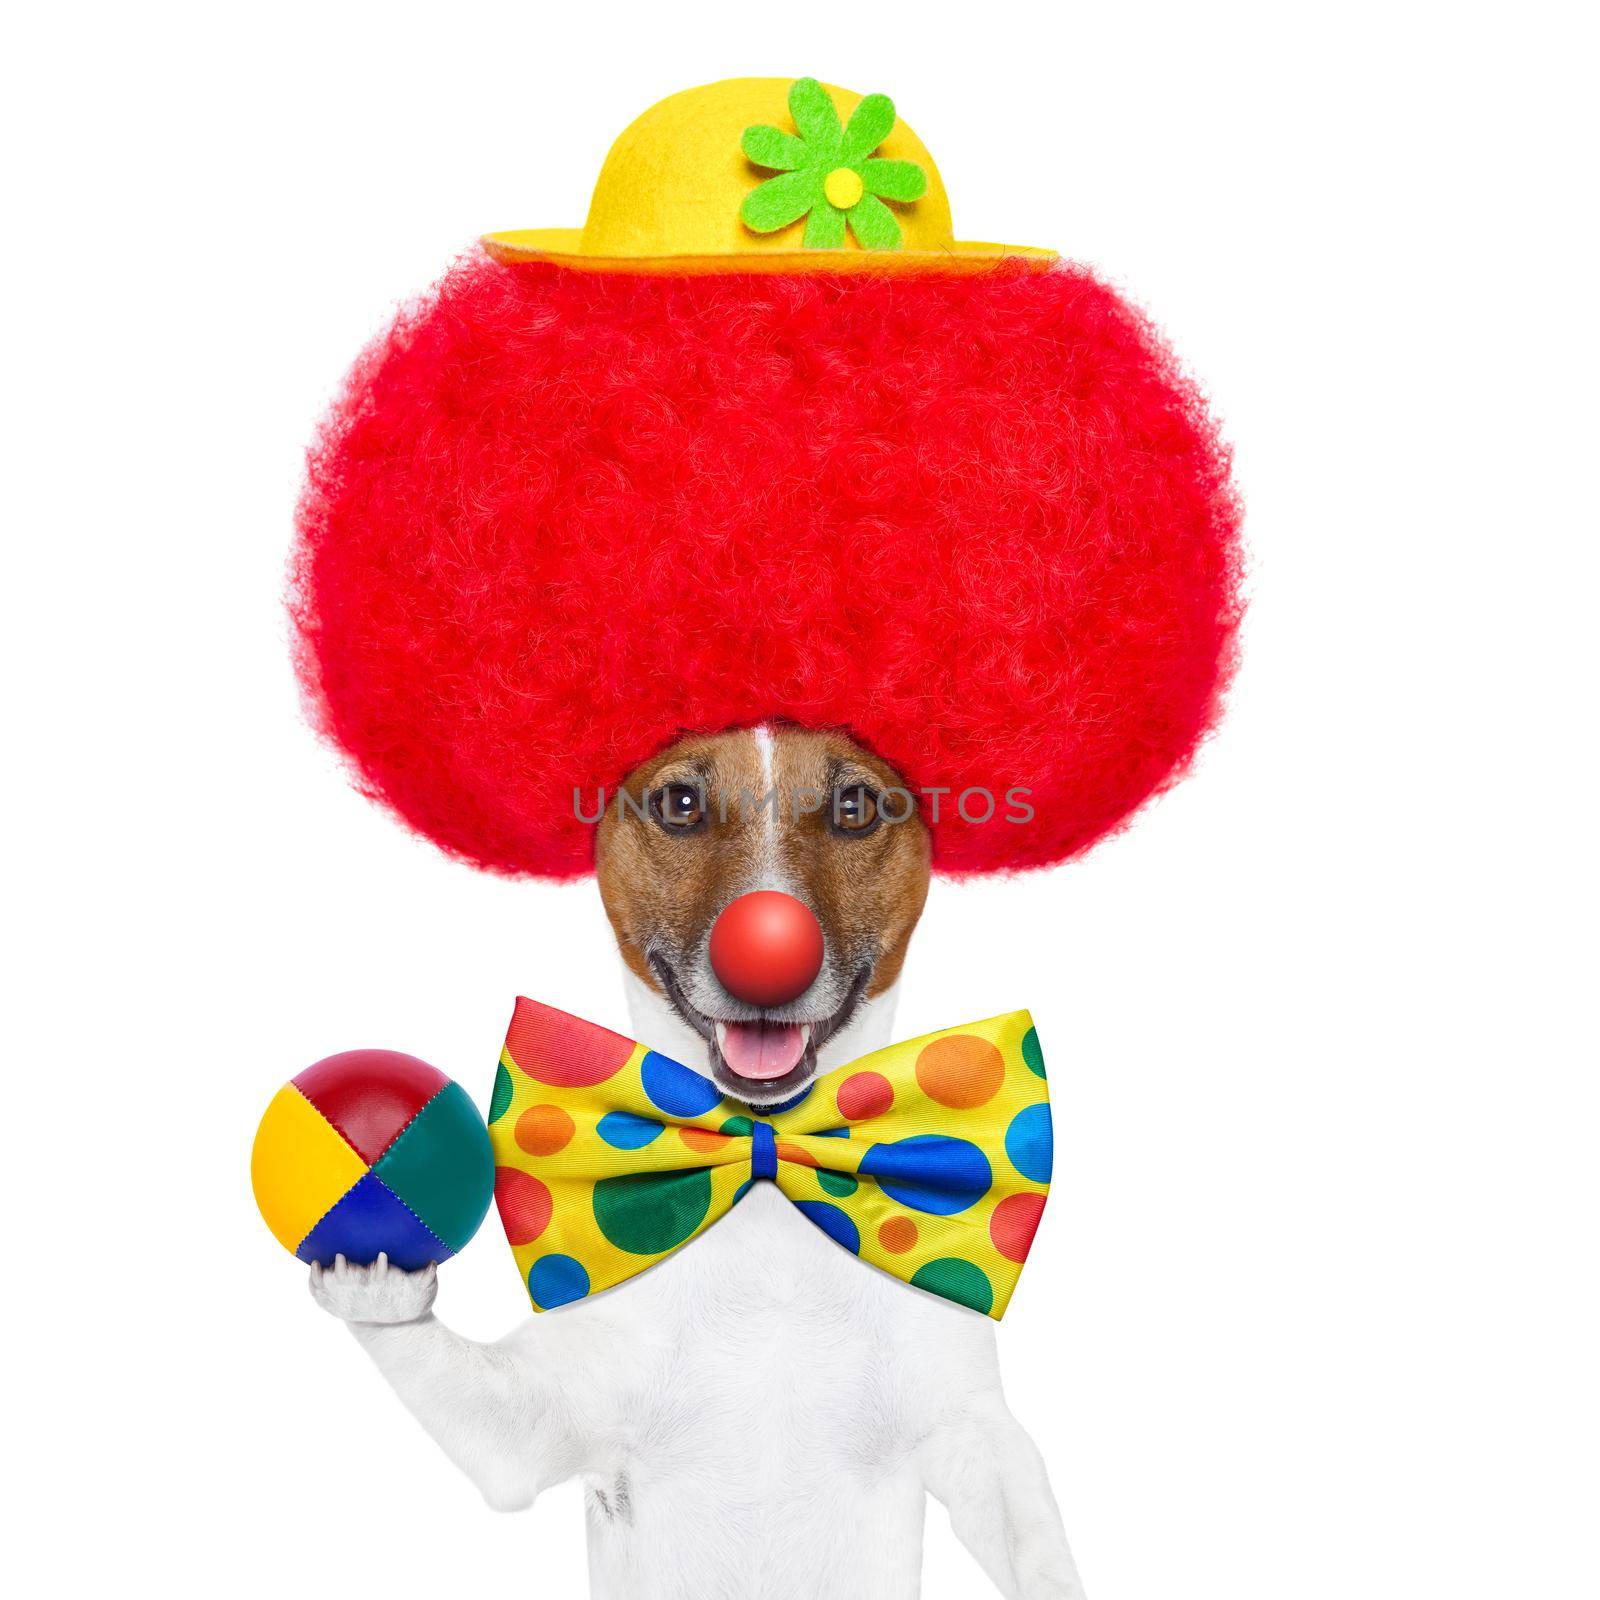 clown dog with red wig and hat by Brosch